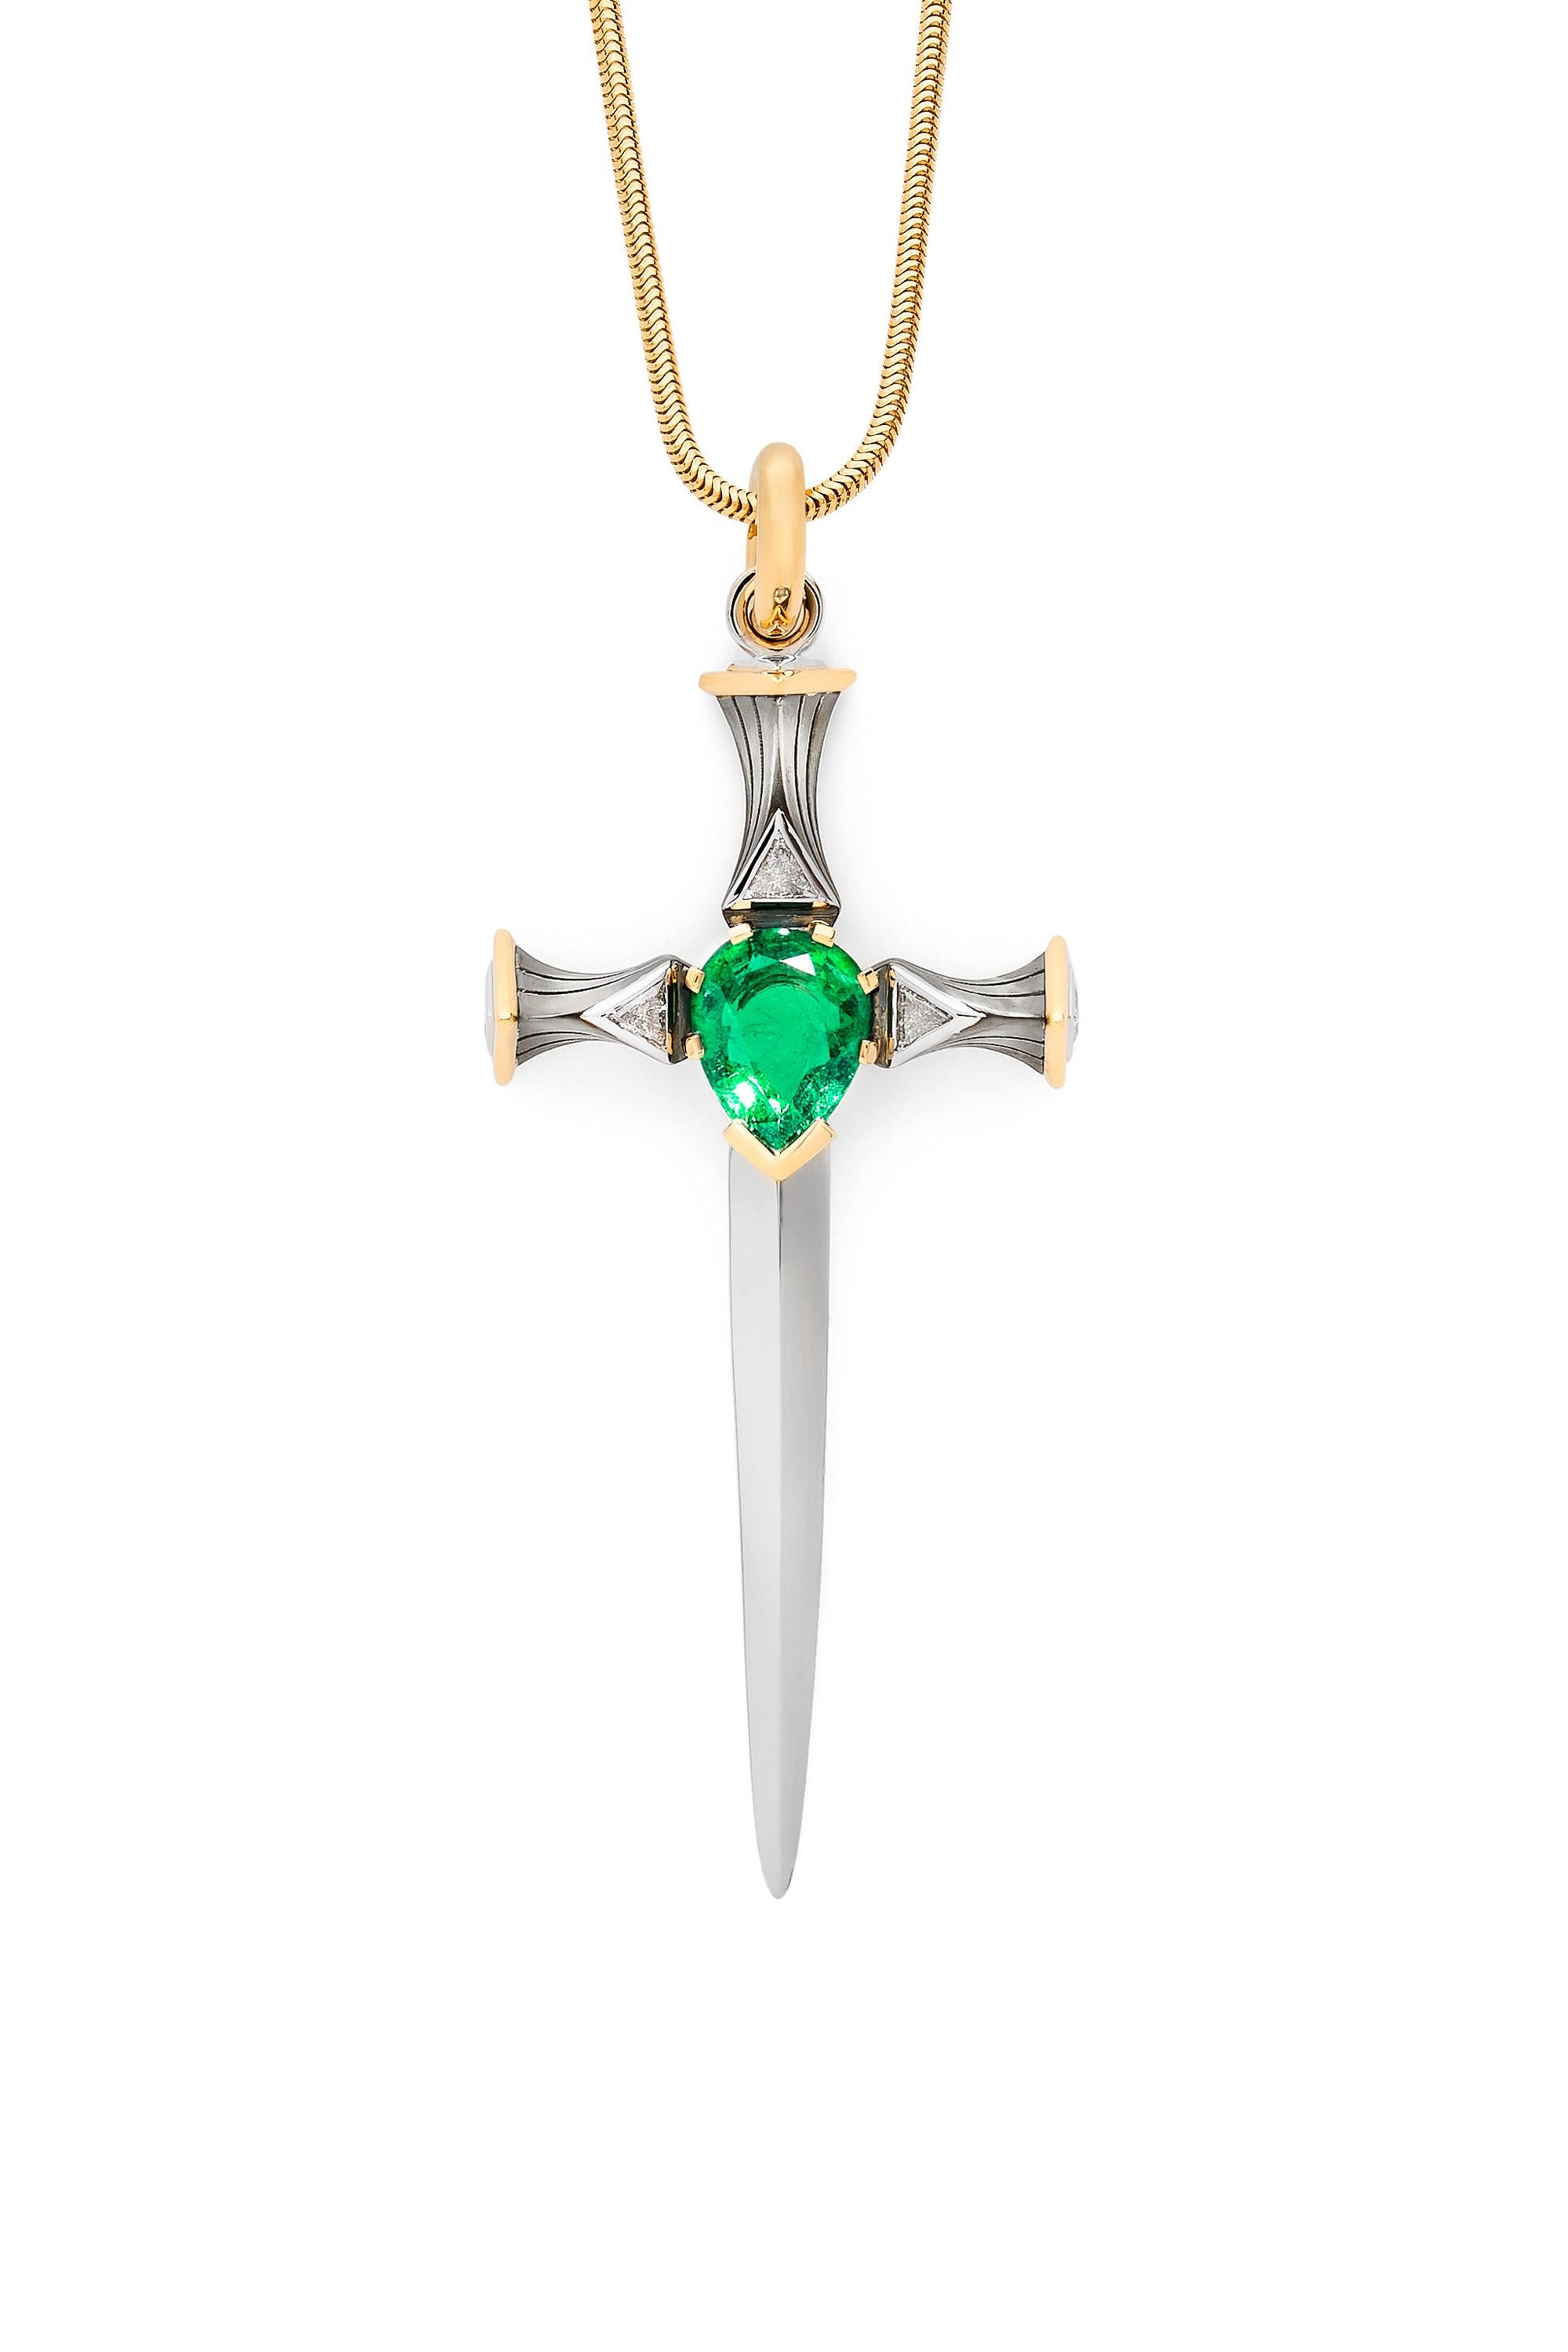 Épée with a gold and distressed silver handle, featuring in its center a pear-shaped emerald surrounded by triangular diamonds, extending into a mirror-polished platinum blade. Openable gold bail. 

Sold without chain.

Available with chain on